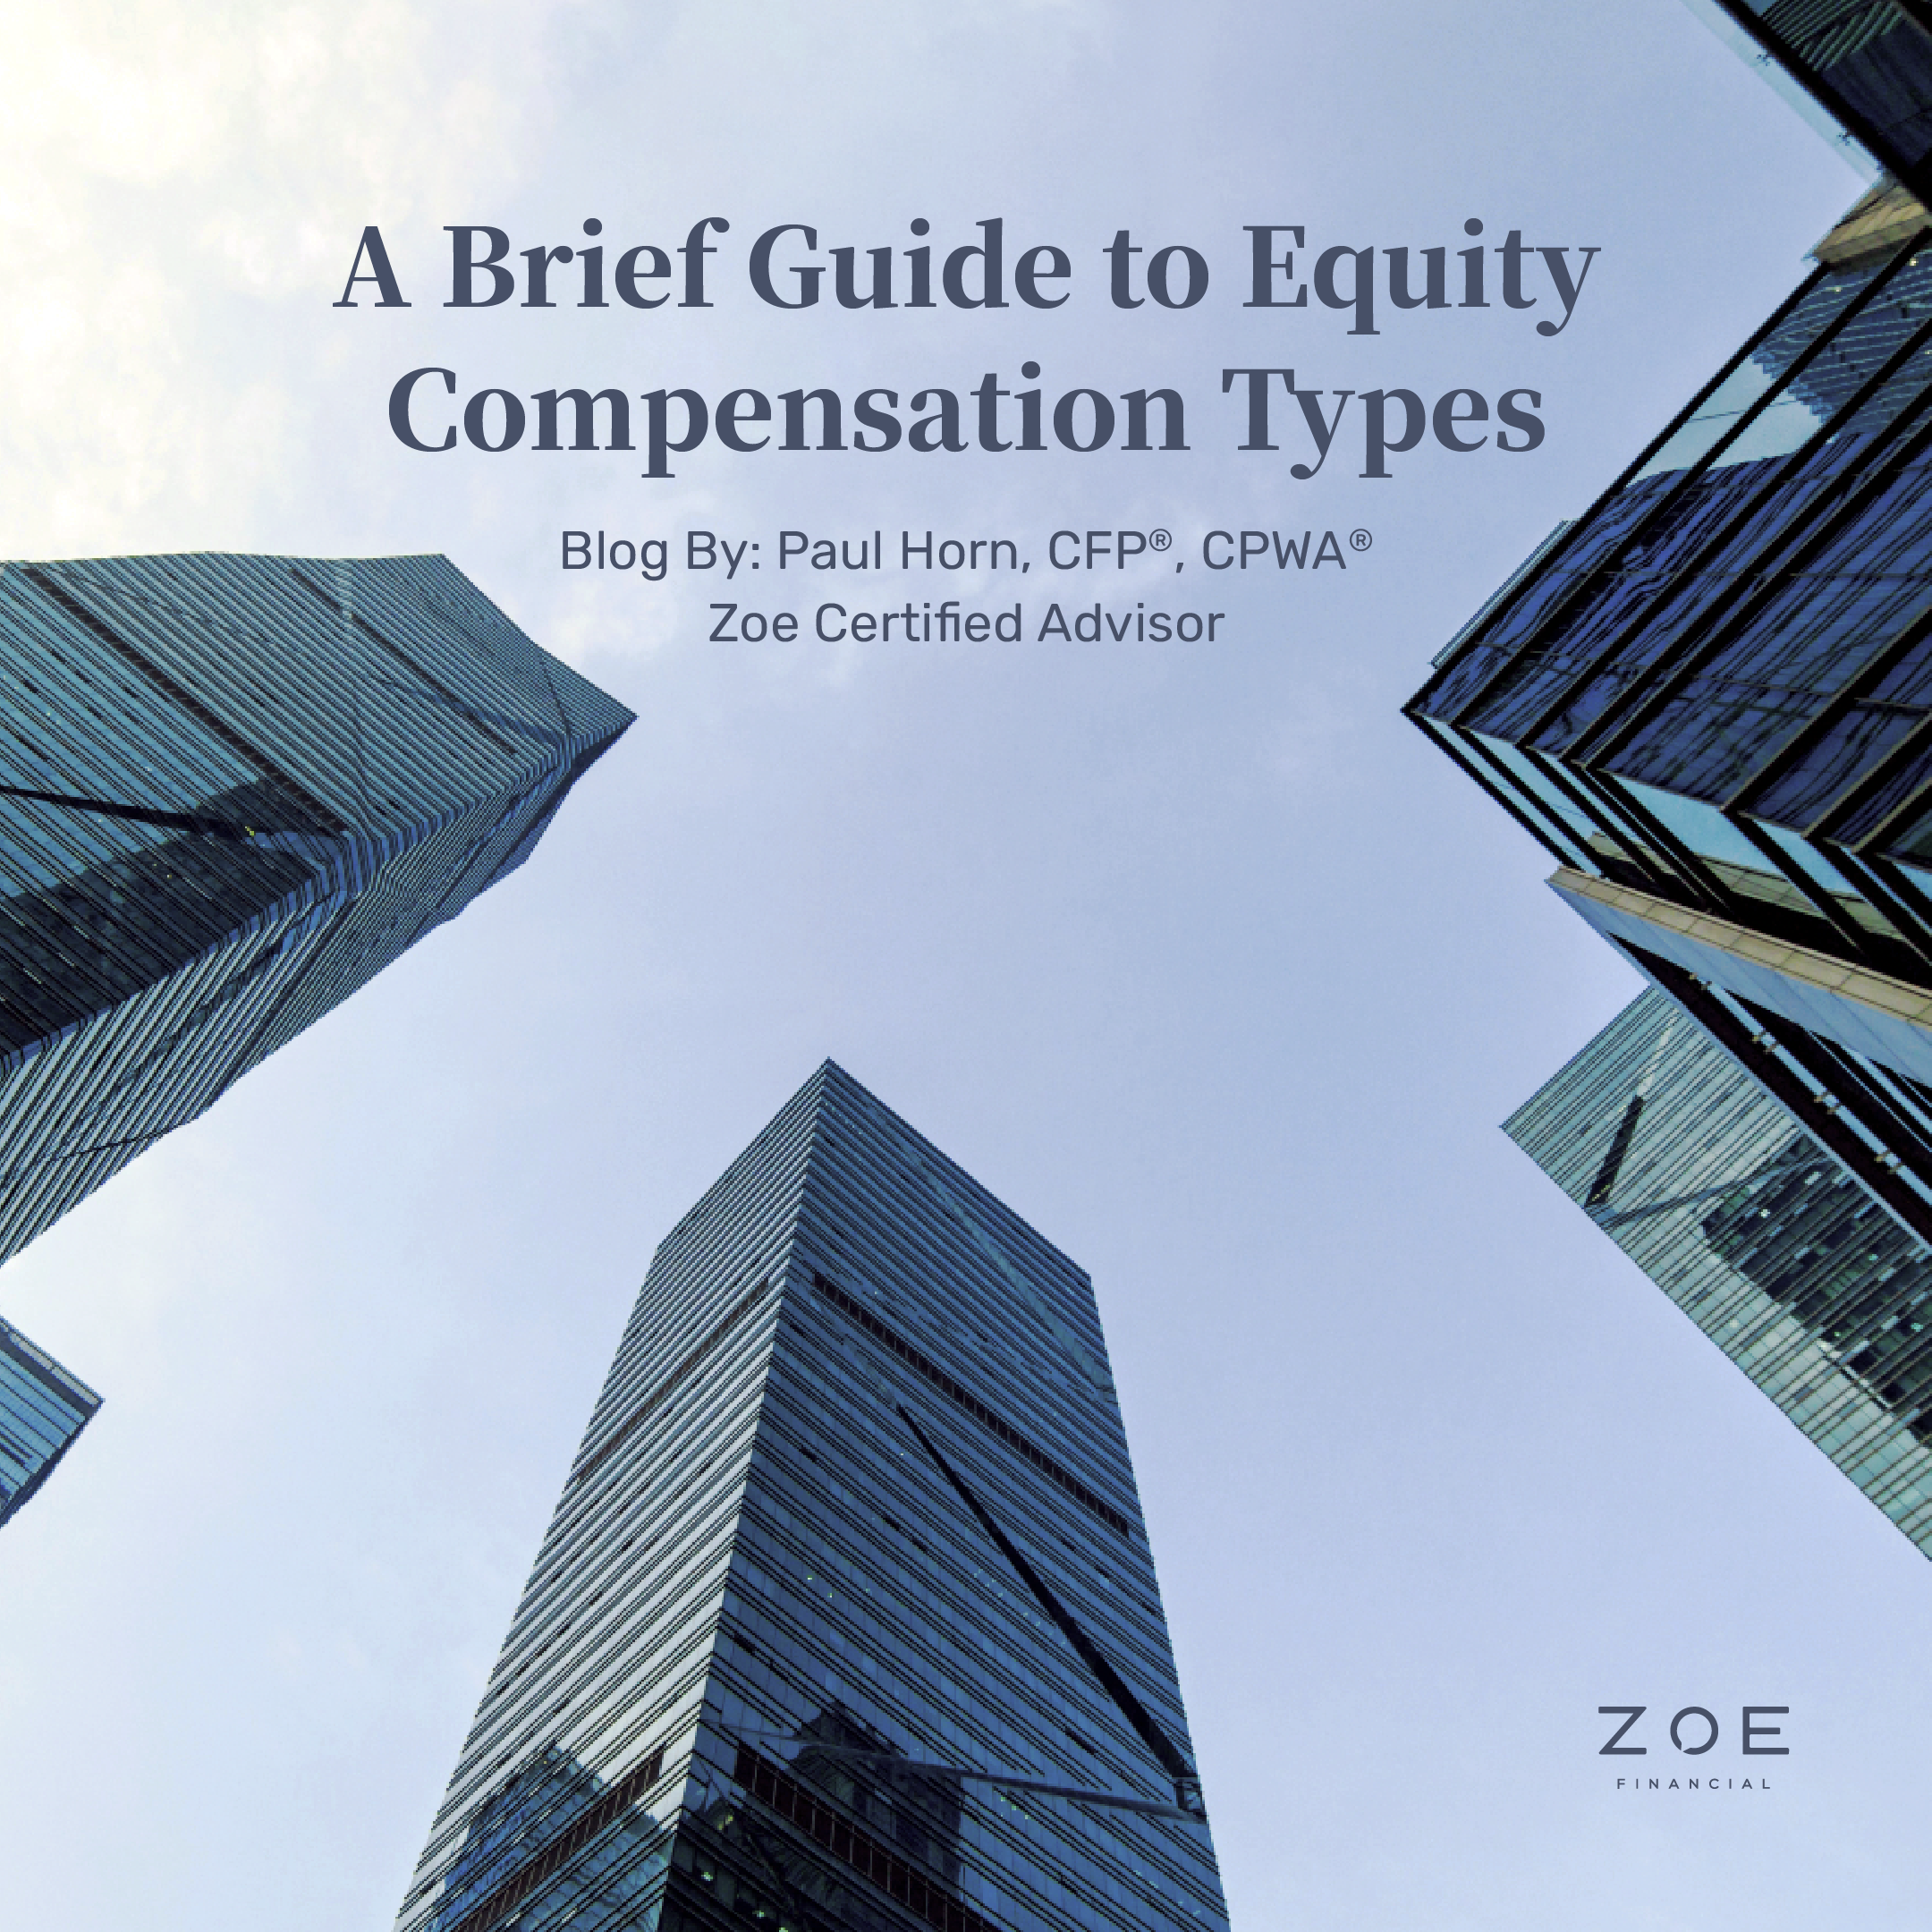 A Brief Guide to Equity Compensation Types